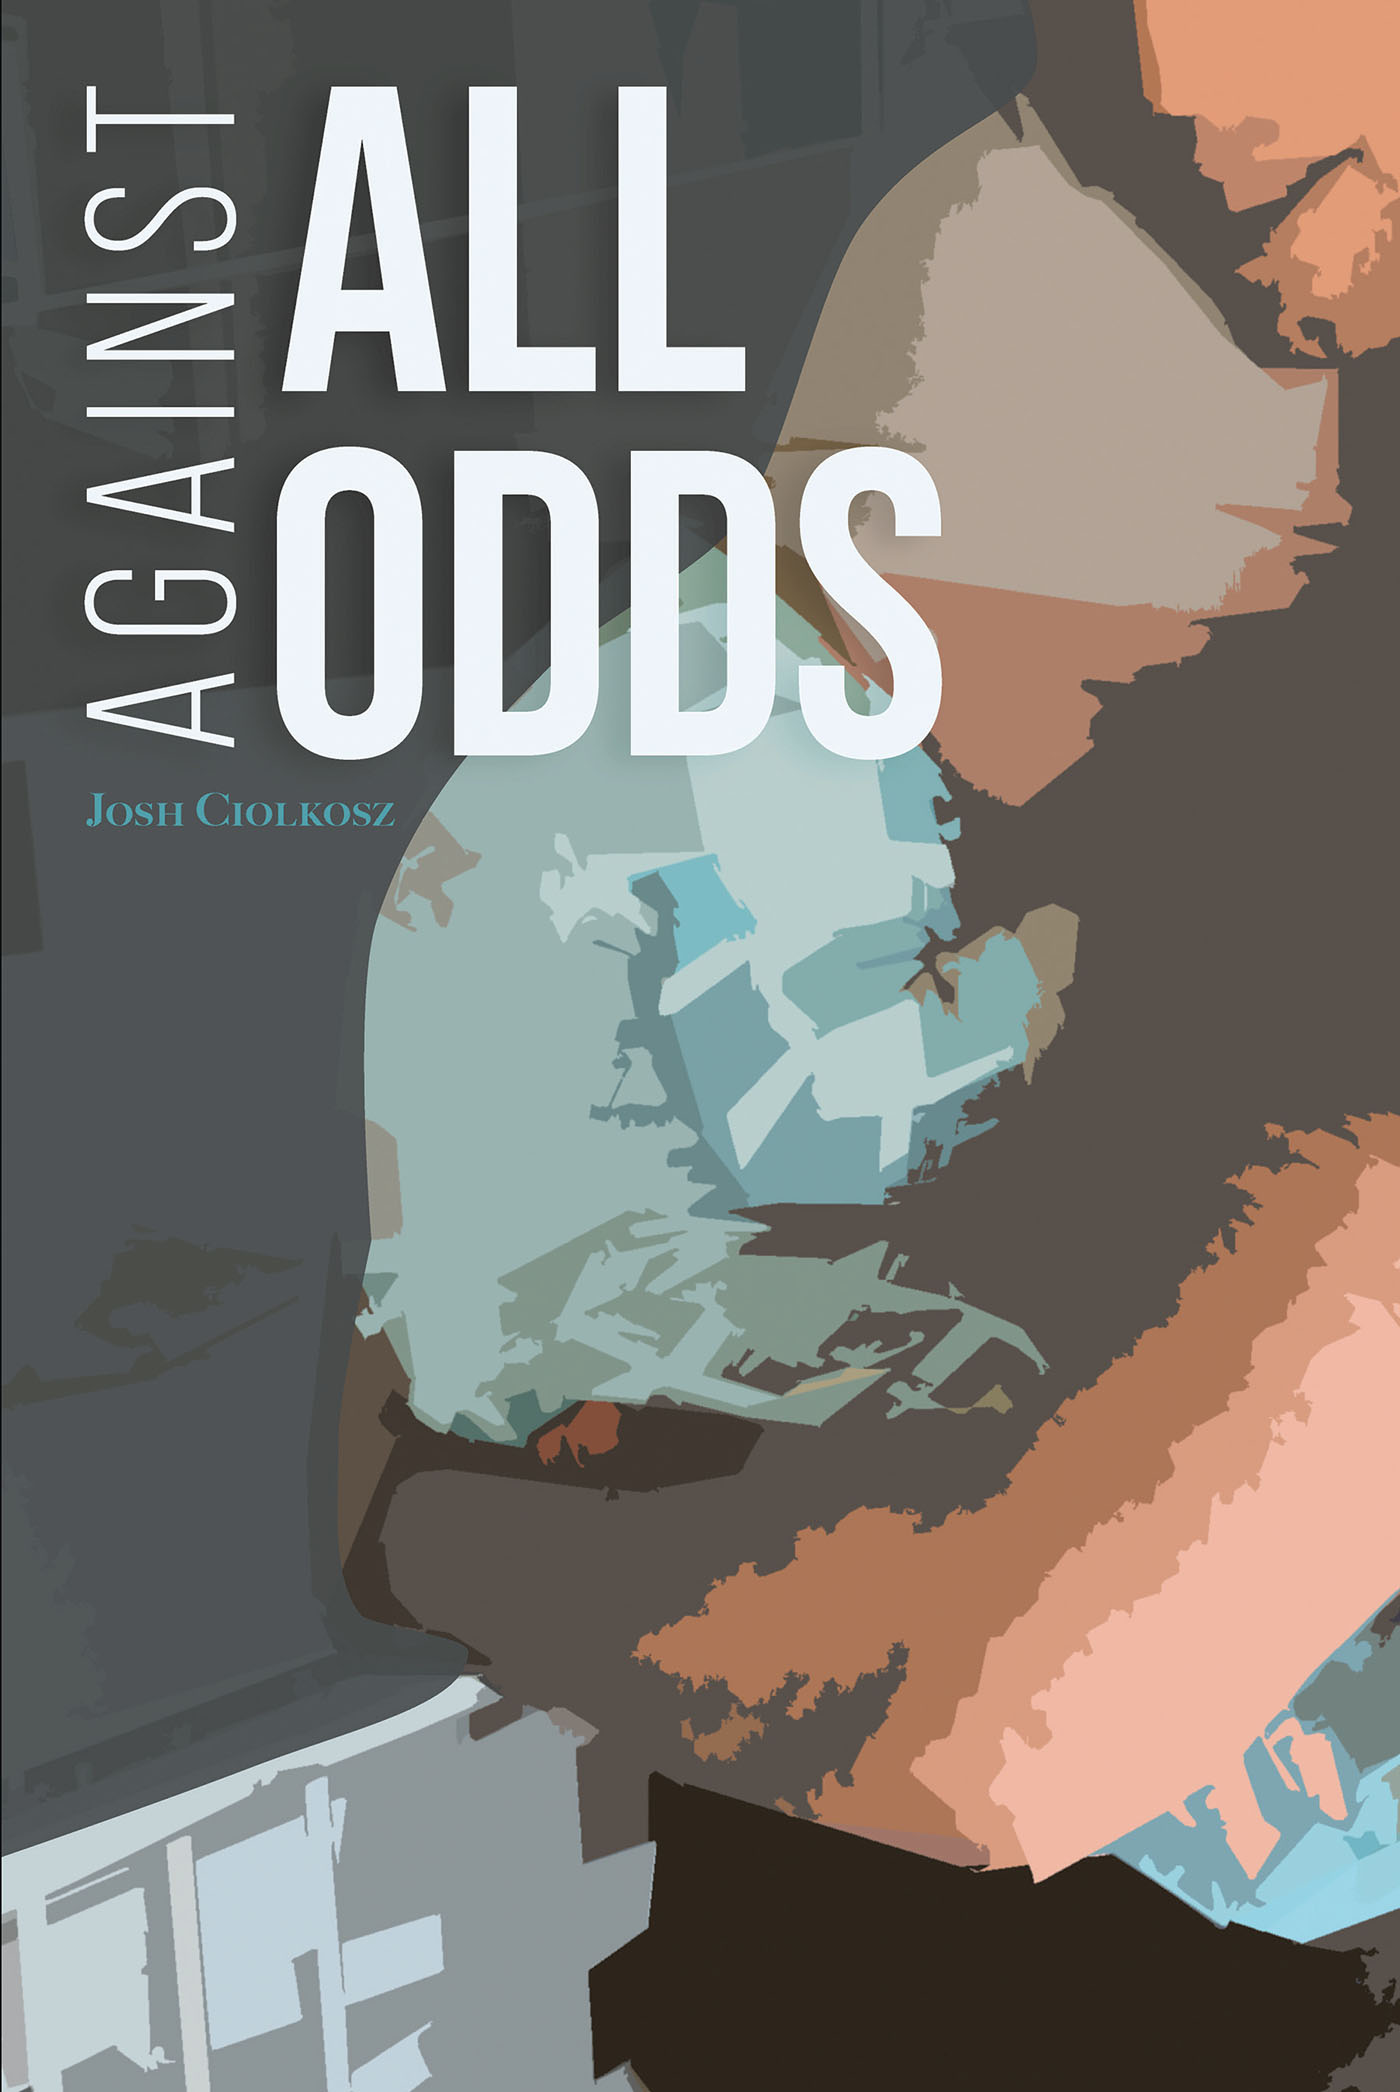 Author Josh Ciolkosz’s New Book, "Against All Odds," is a Heartfelt Story of Faith in the Face of Life's Most Difficult Moments as the Author's Son Battles Brain Cancer